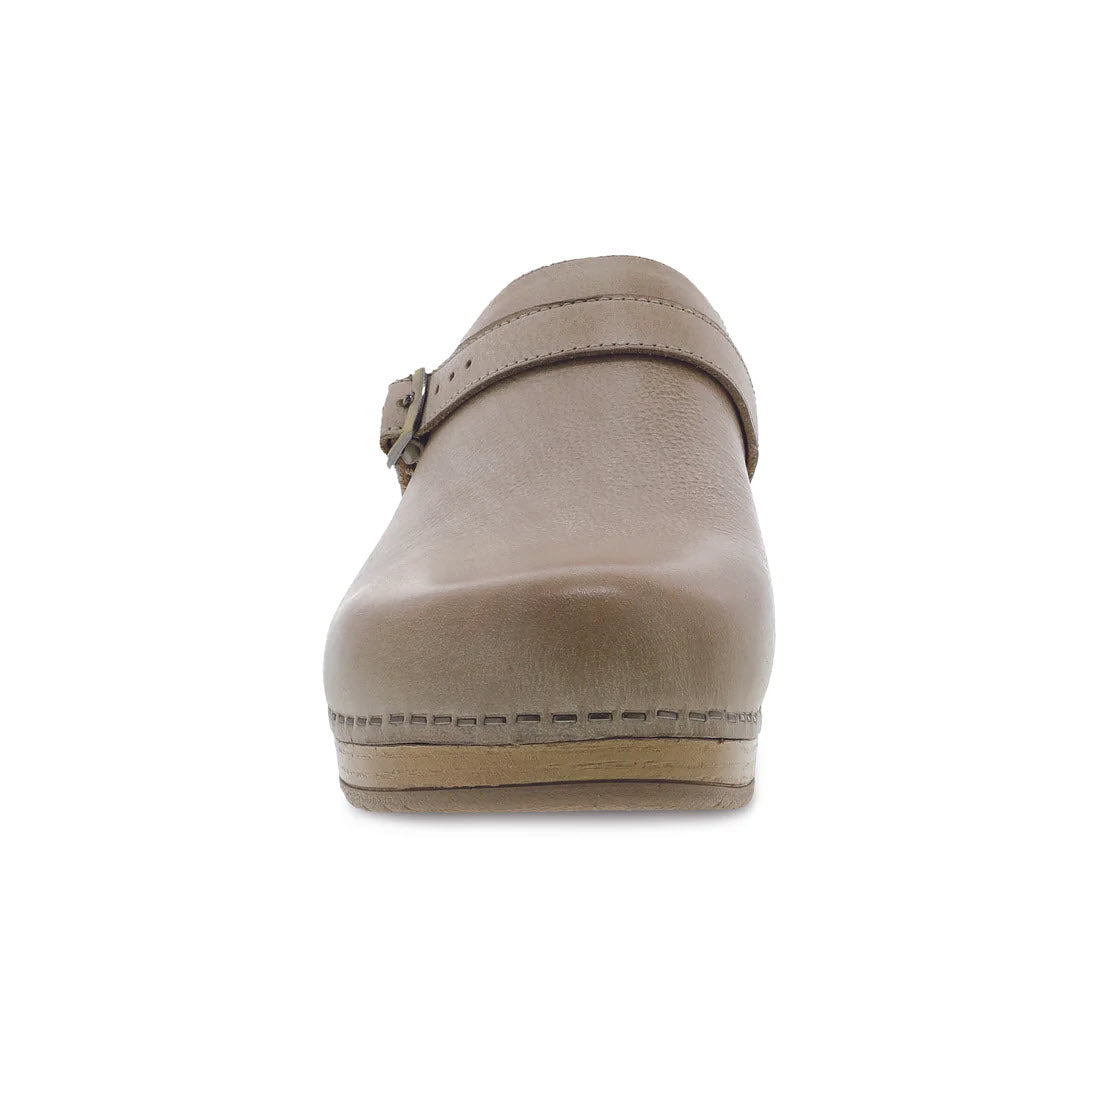 Front view of a single Dansko beige leather mule with an adjustable strap, isolated on a white background.